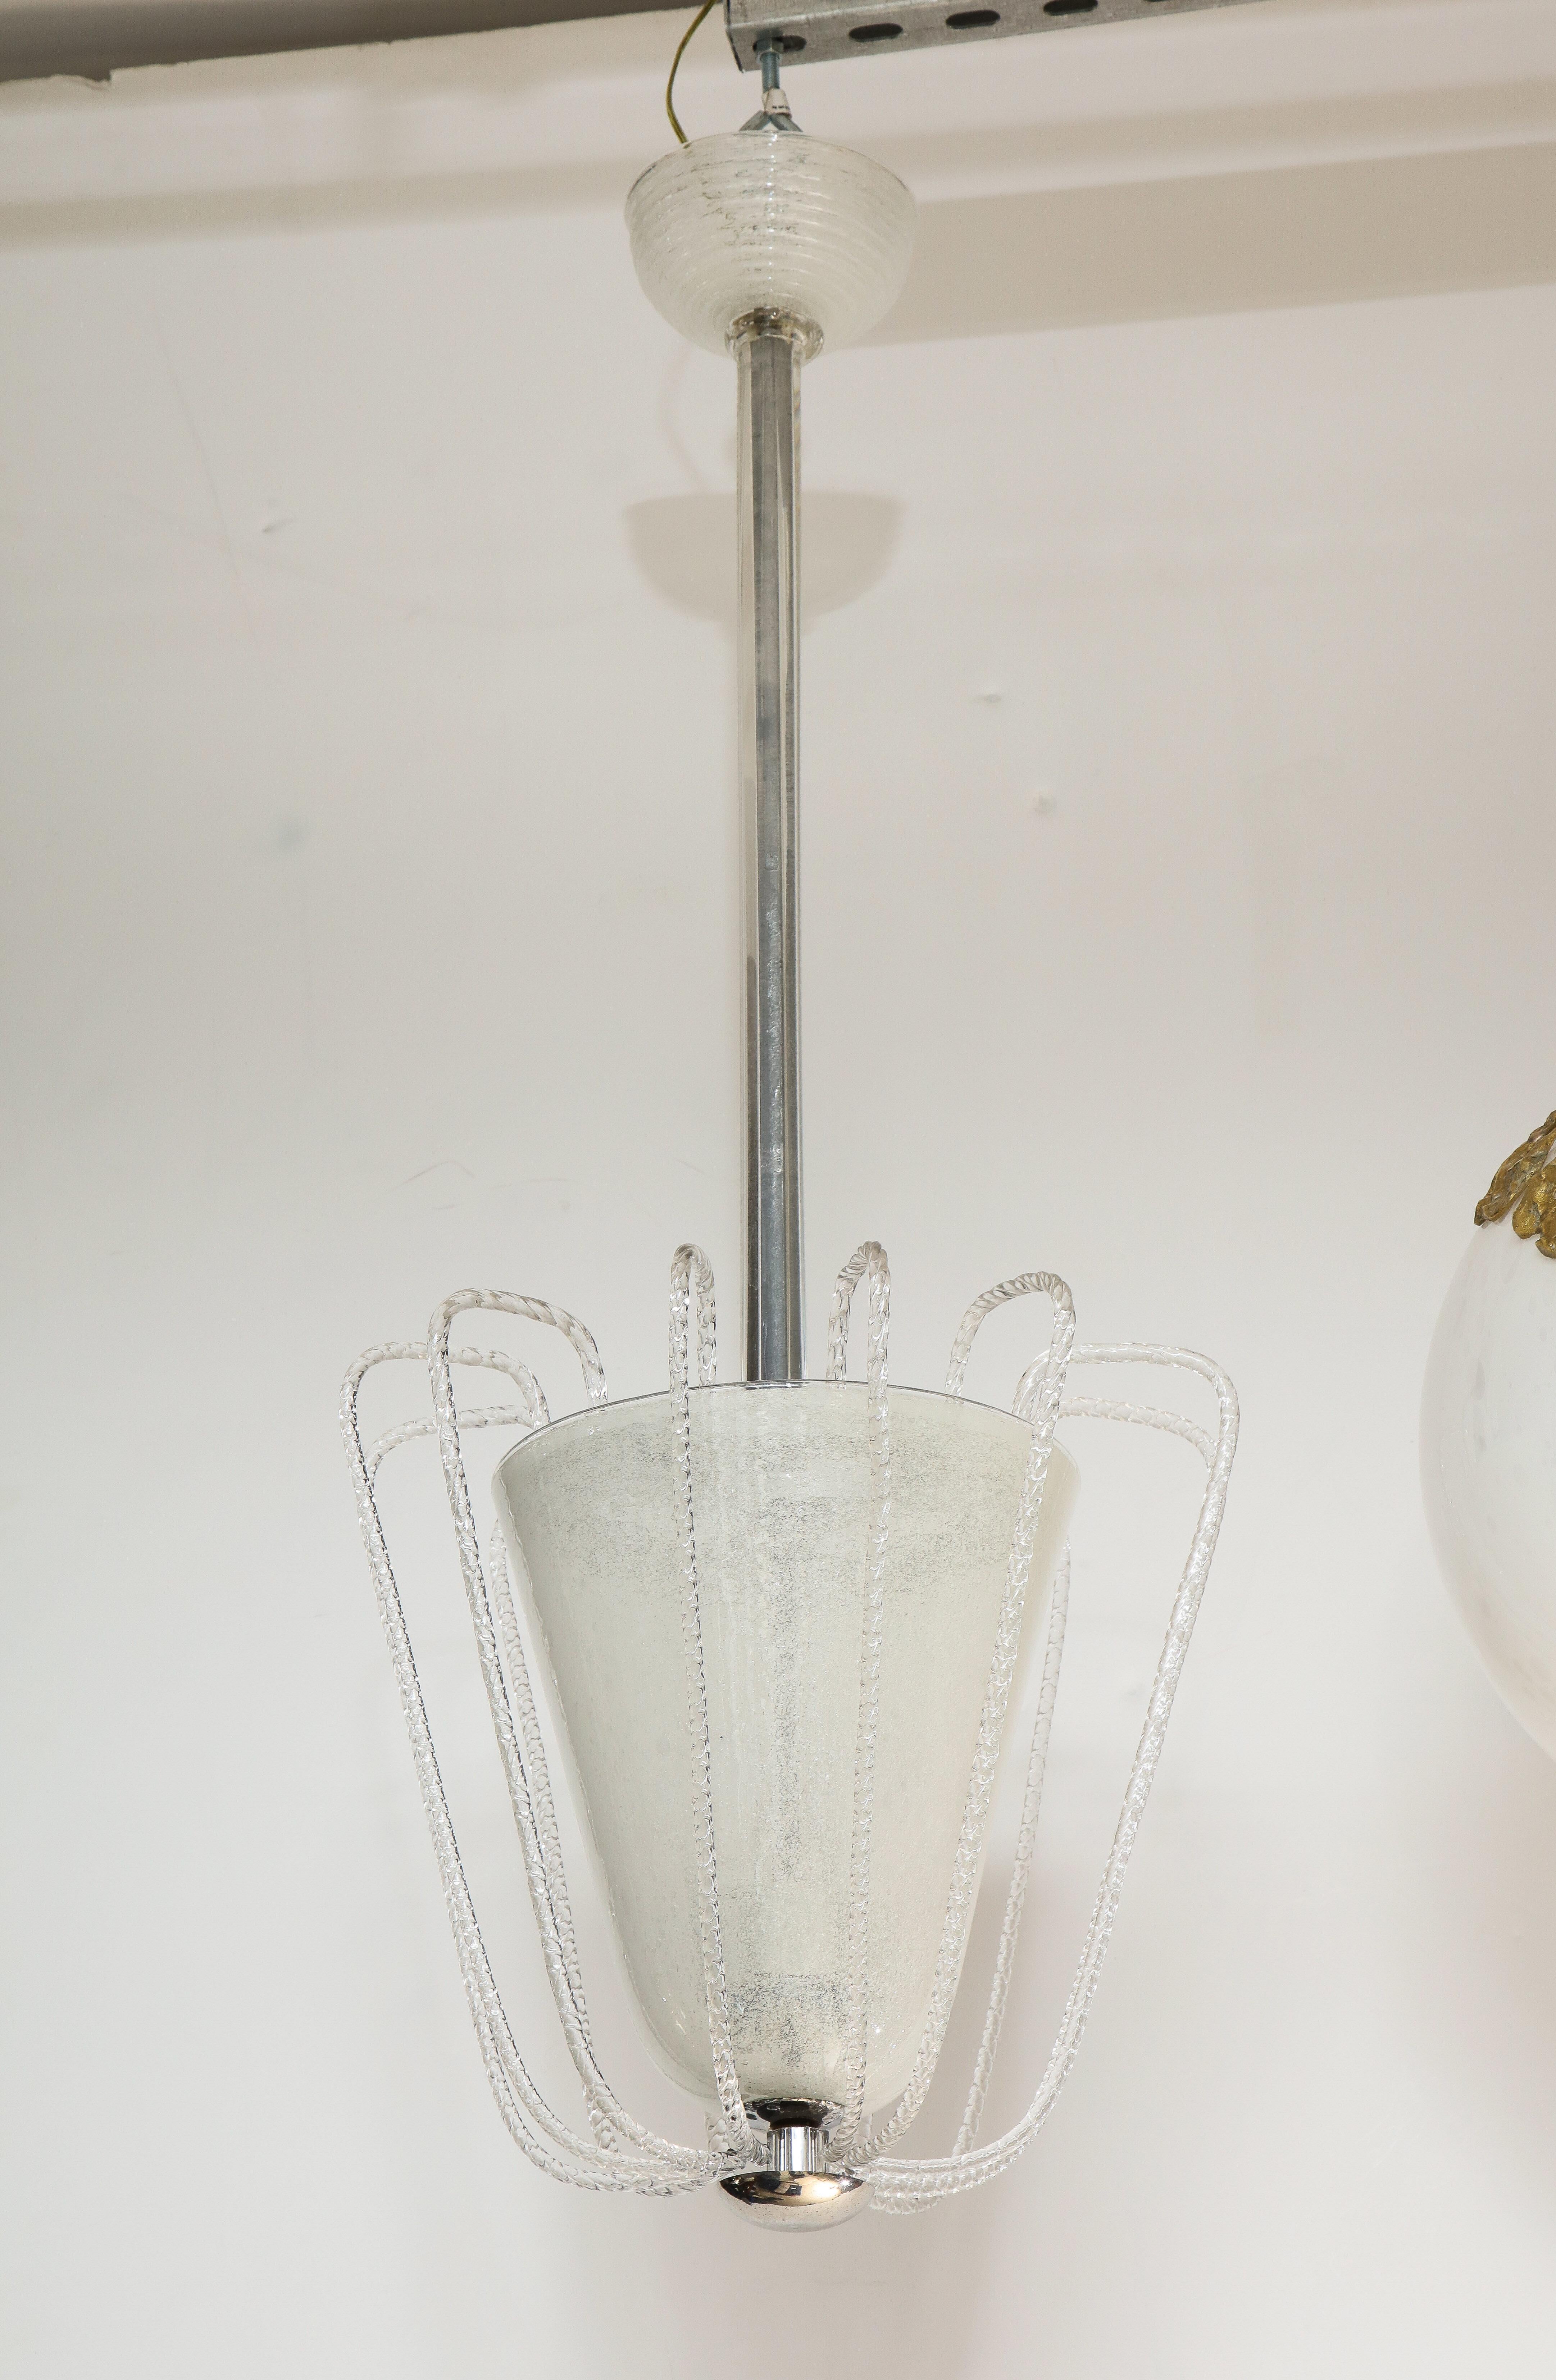 An Italian Art Deco 'fountain' 1930s chandelier, the body with frosted glass surrounded by turned glass spindles creating a waterfall effect, the supporting finial in plated nickel and the central stem and canopy in turned blown glass. Exquisitely